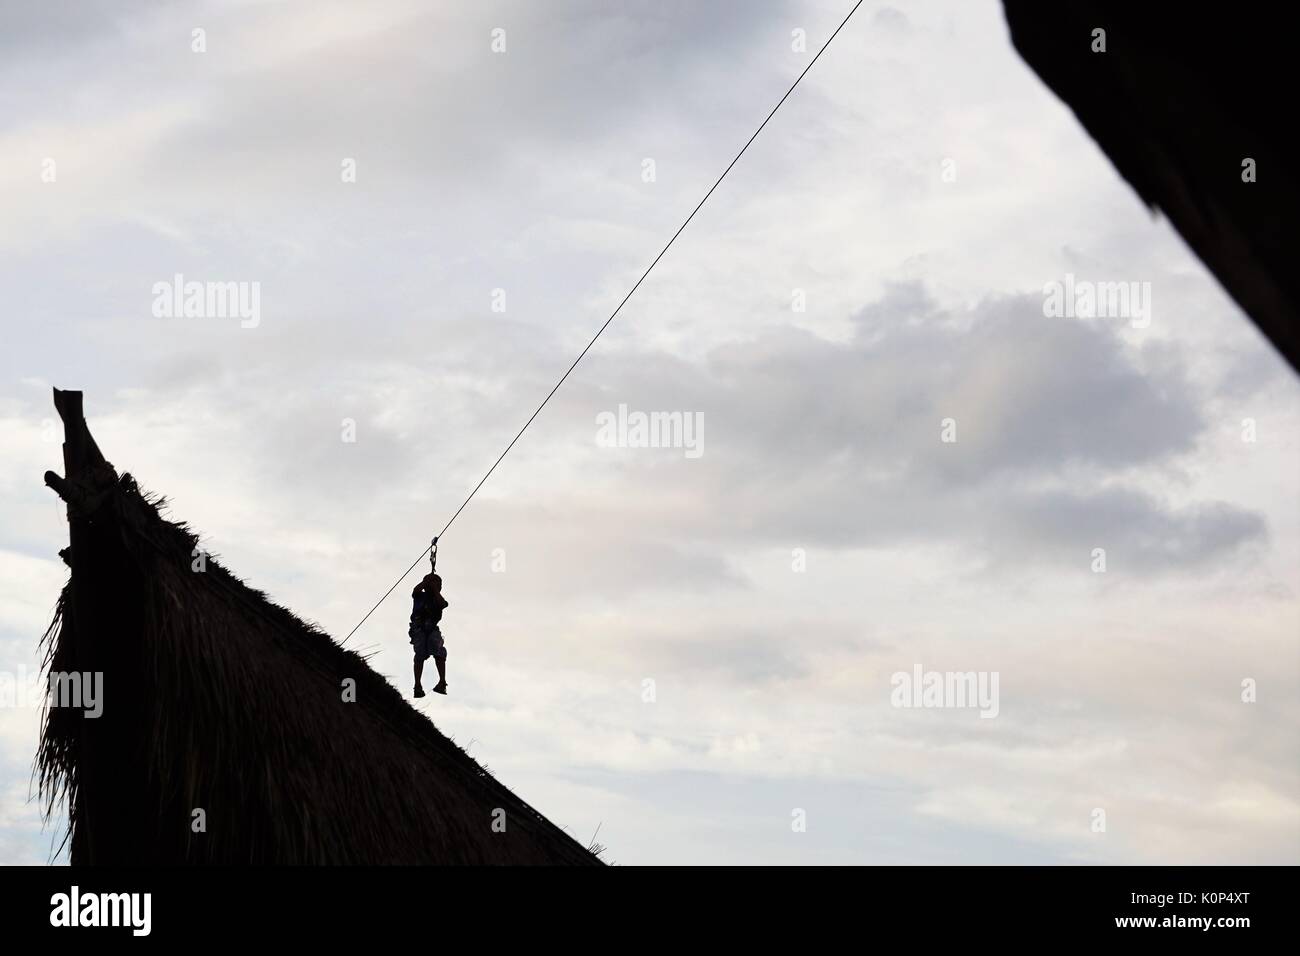 person zip lining between buildings against blue sky with clouds Stock Photo